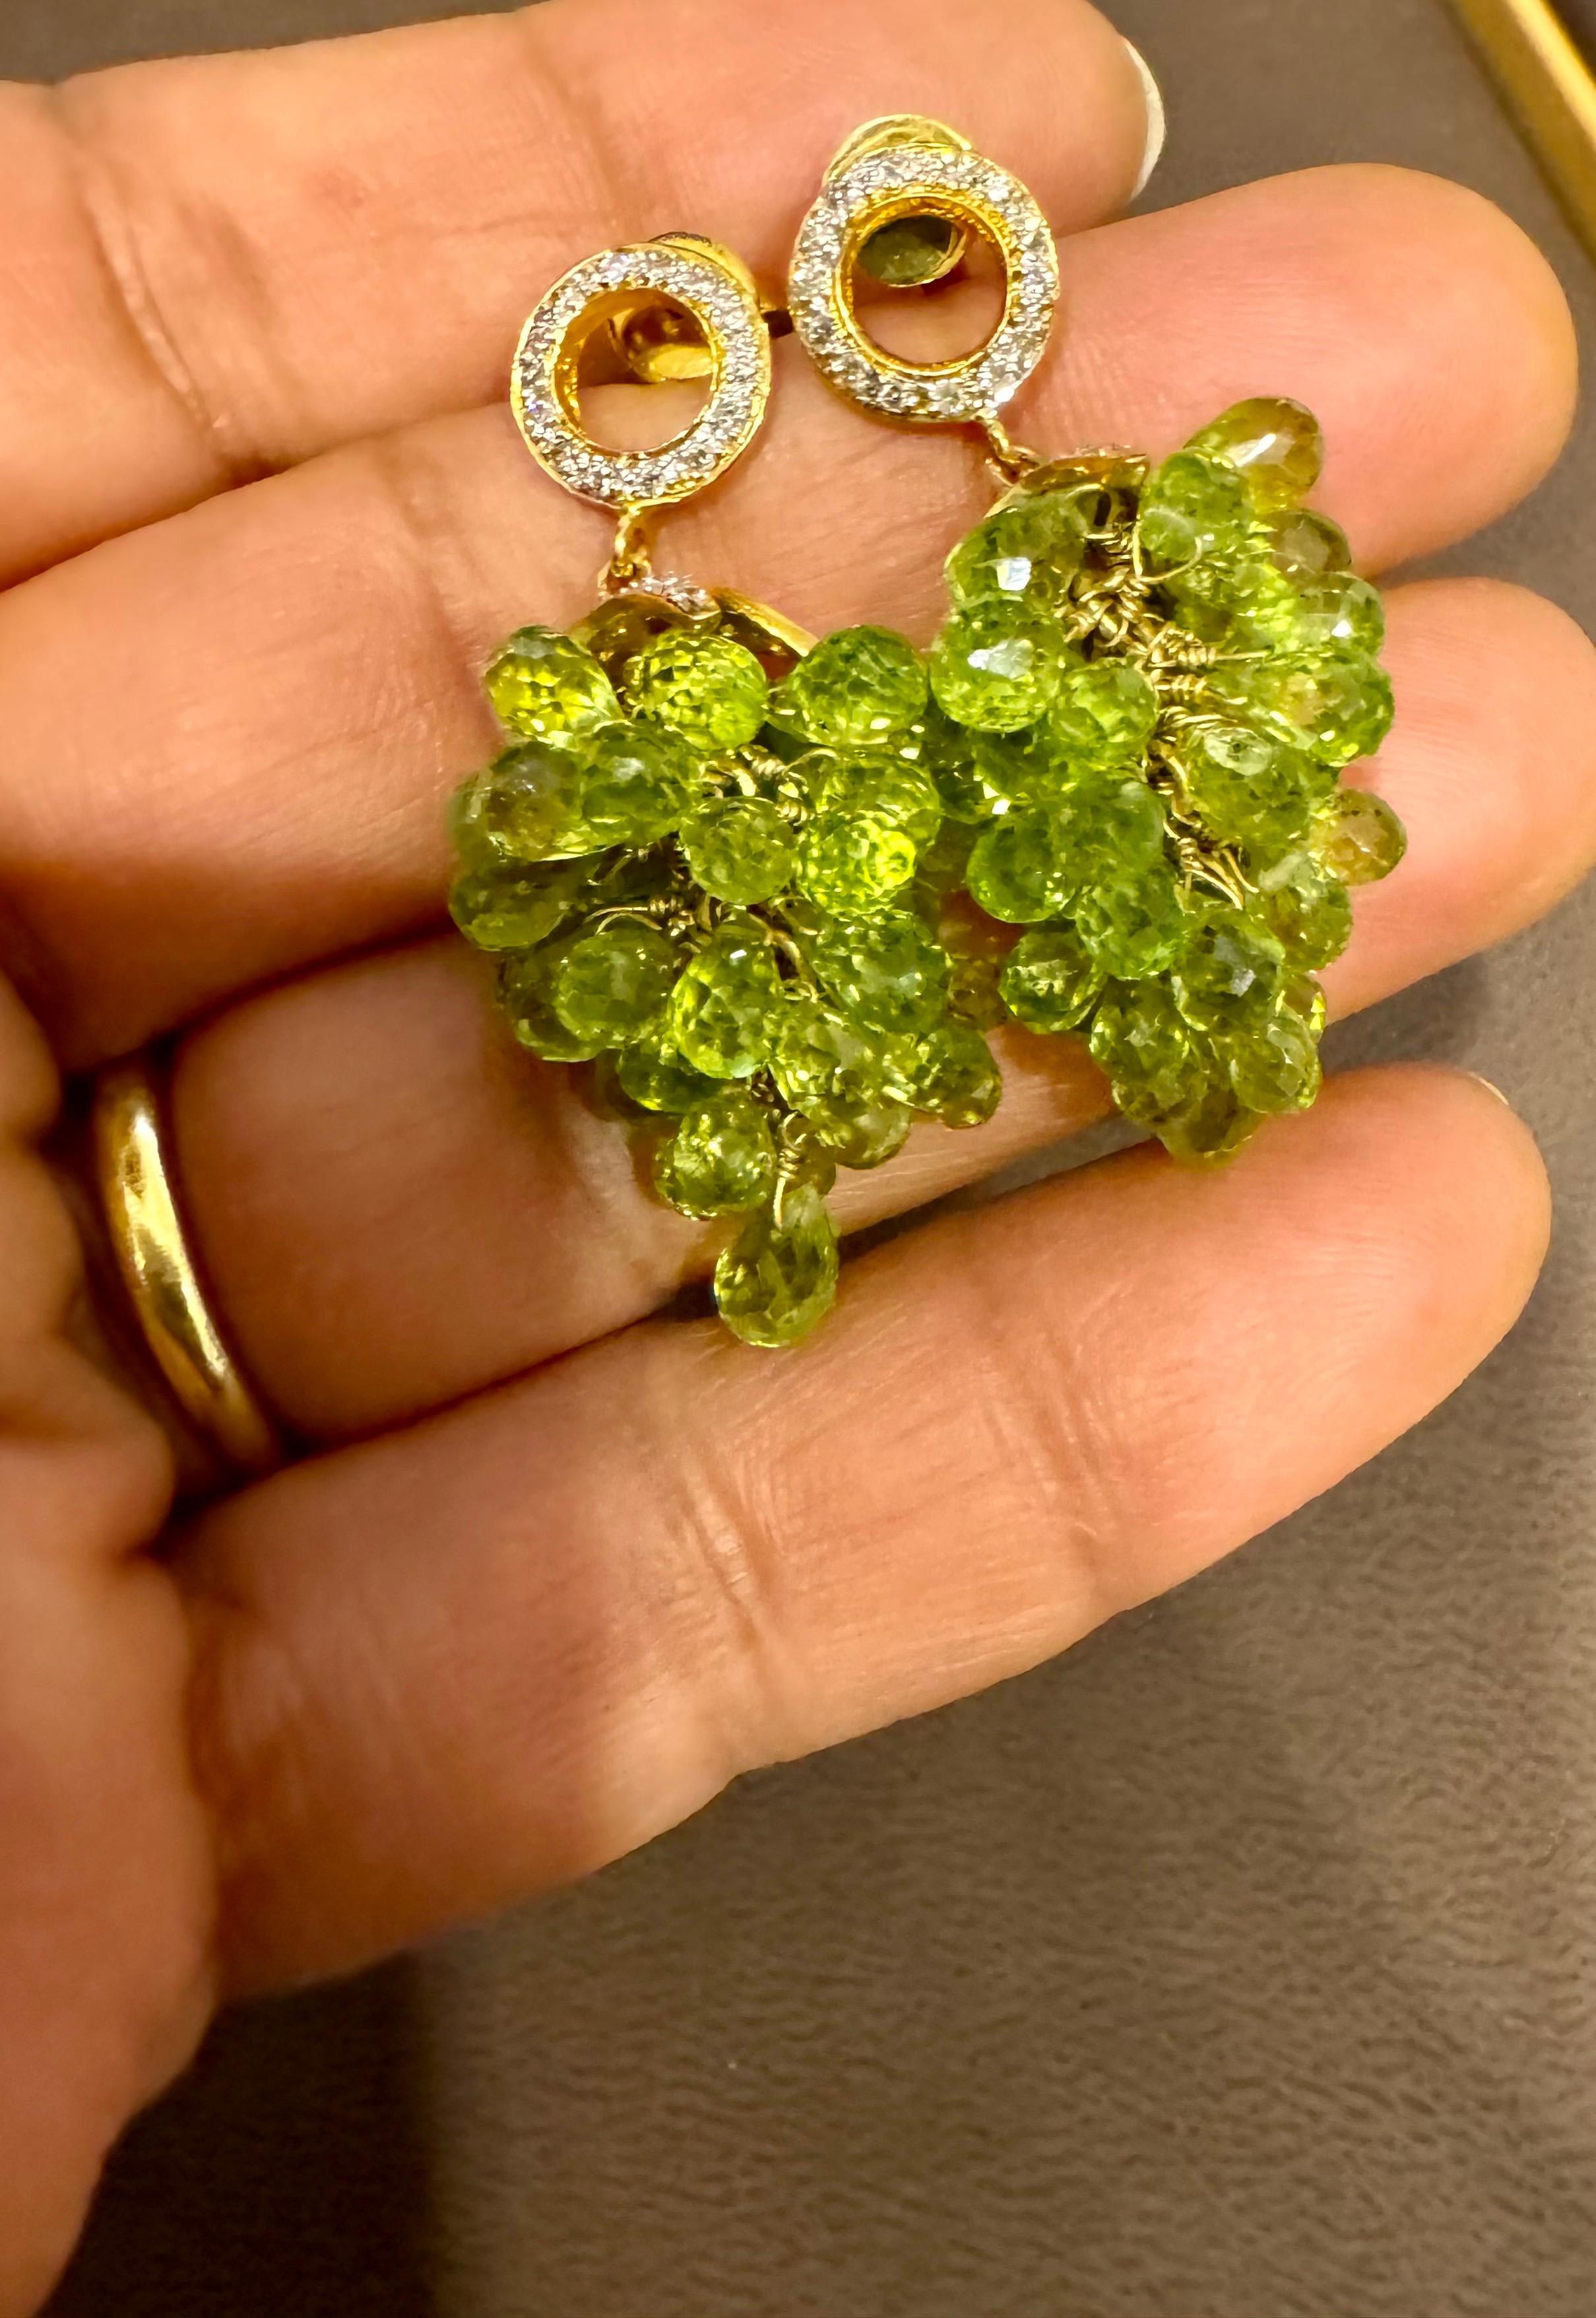 Approximately 40 Carats of natural Peridot  Briolettes & Diamond  Hanging Earrings  18 Karat  Gold 
This exquisite pair of earrings are beautifully crafted with 18 karat yellow gold  weighing 15.5 grams

Brilliant cut diamonds are making a circle